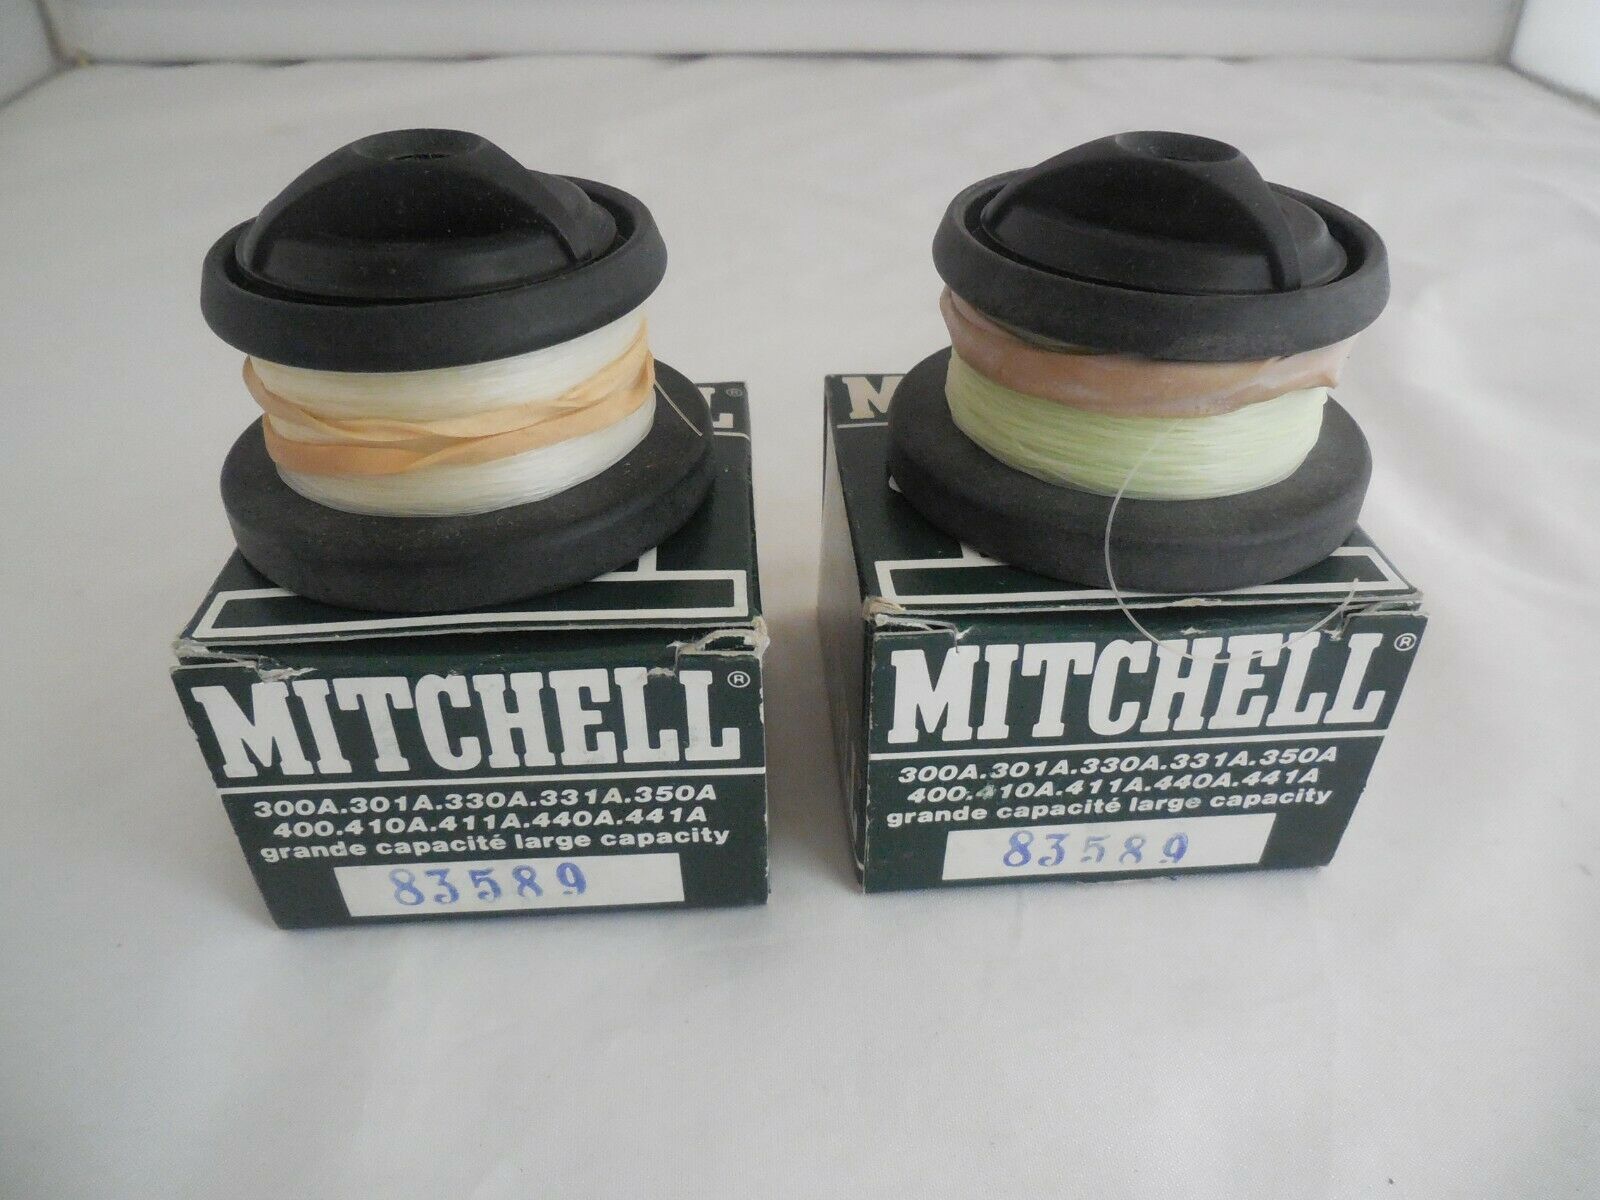 2 New  Mitchell Spinning Reel Spools 300 300a 330 400 410a 440 500  83589 Boxed